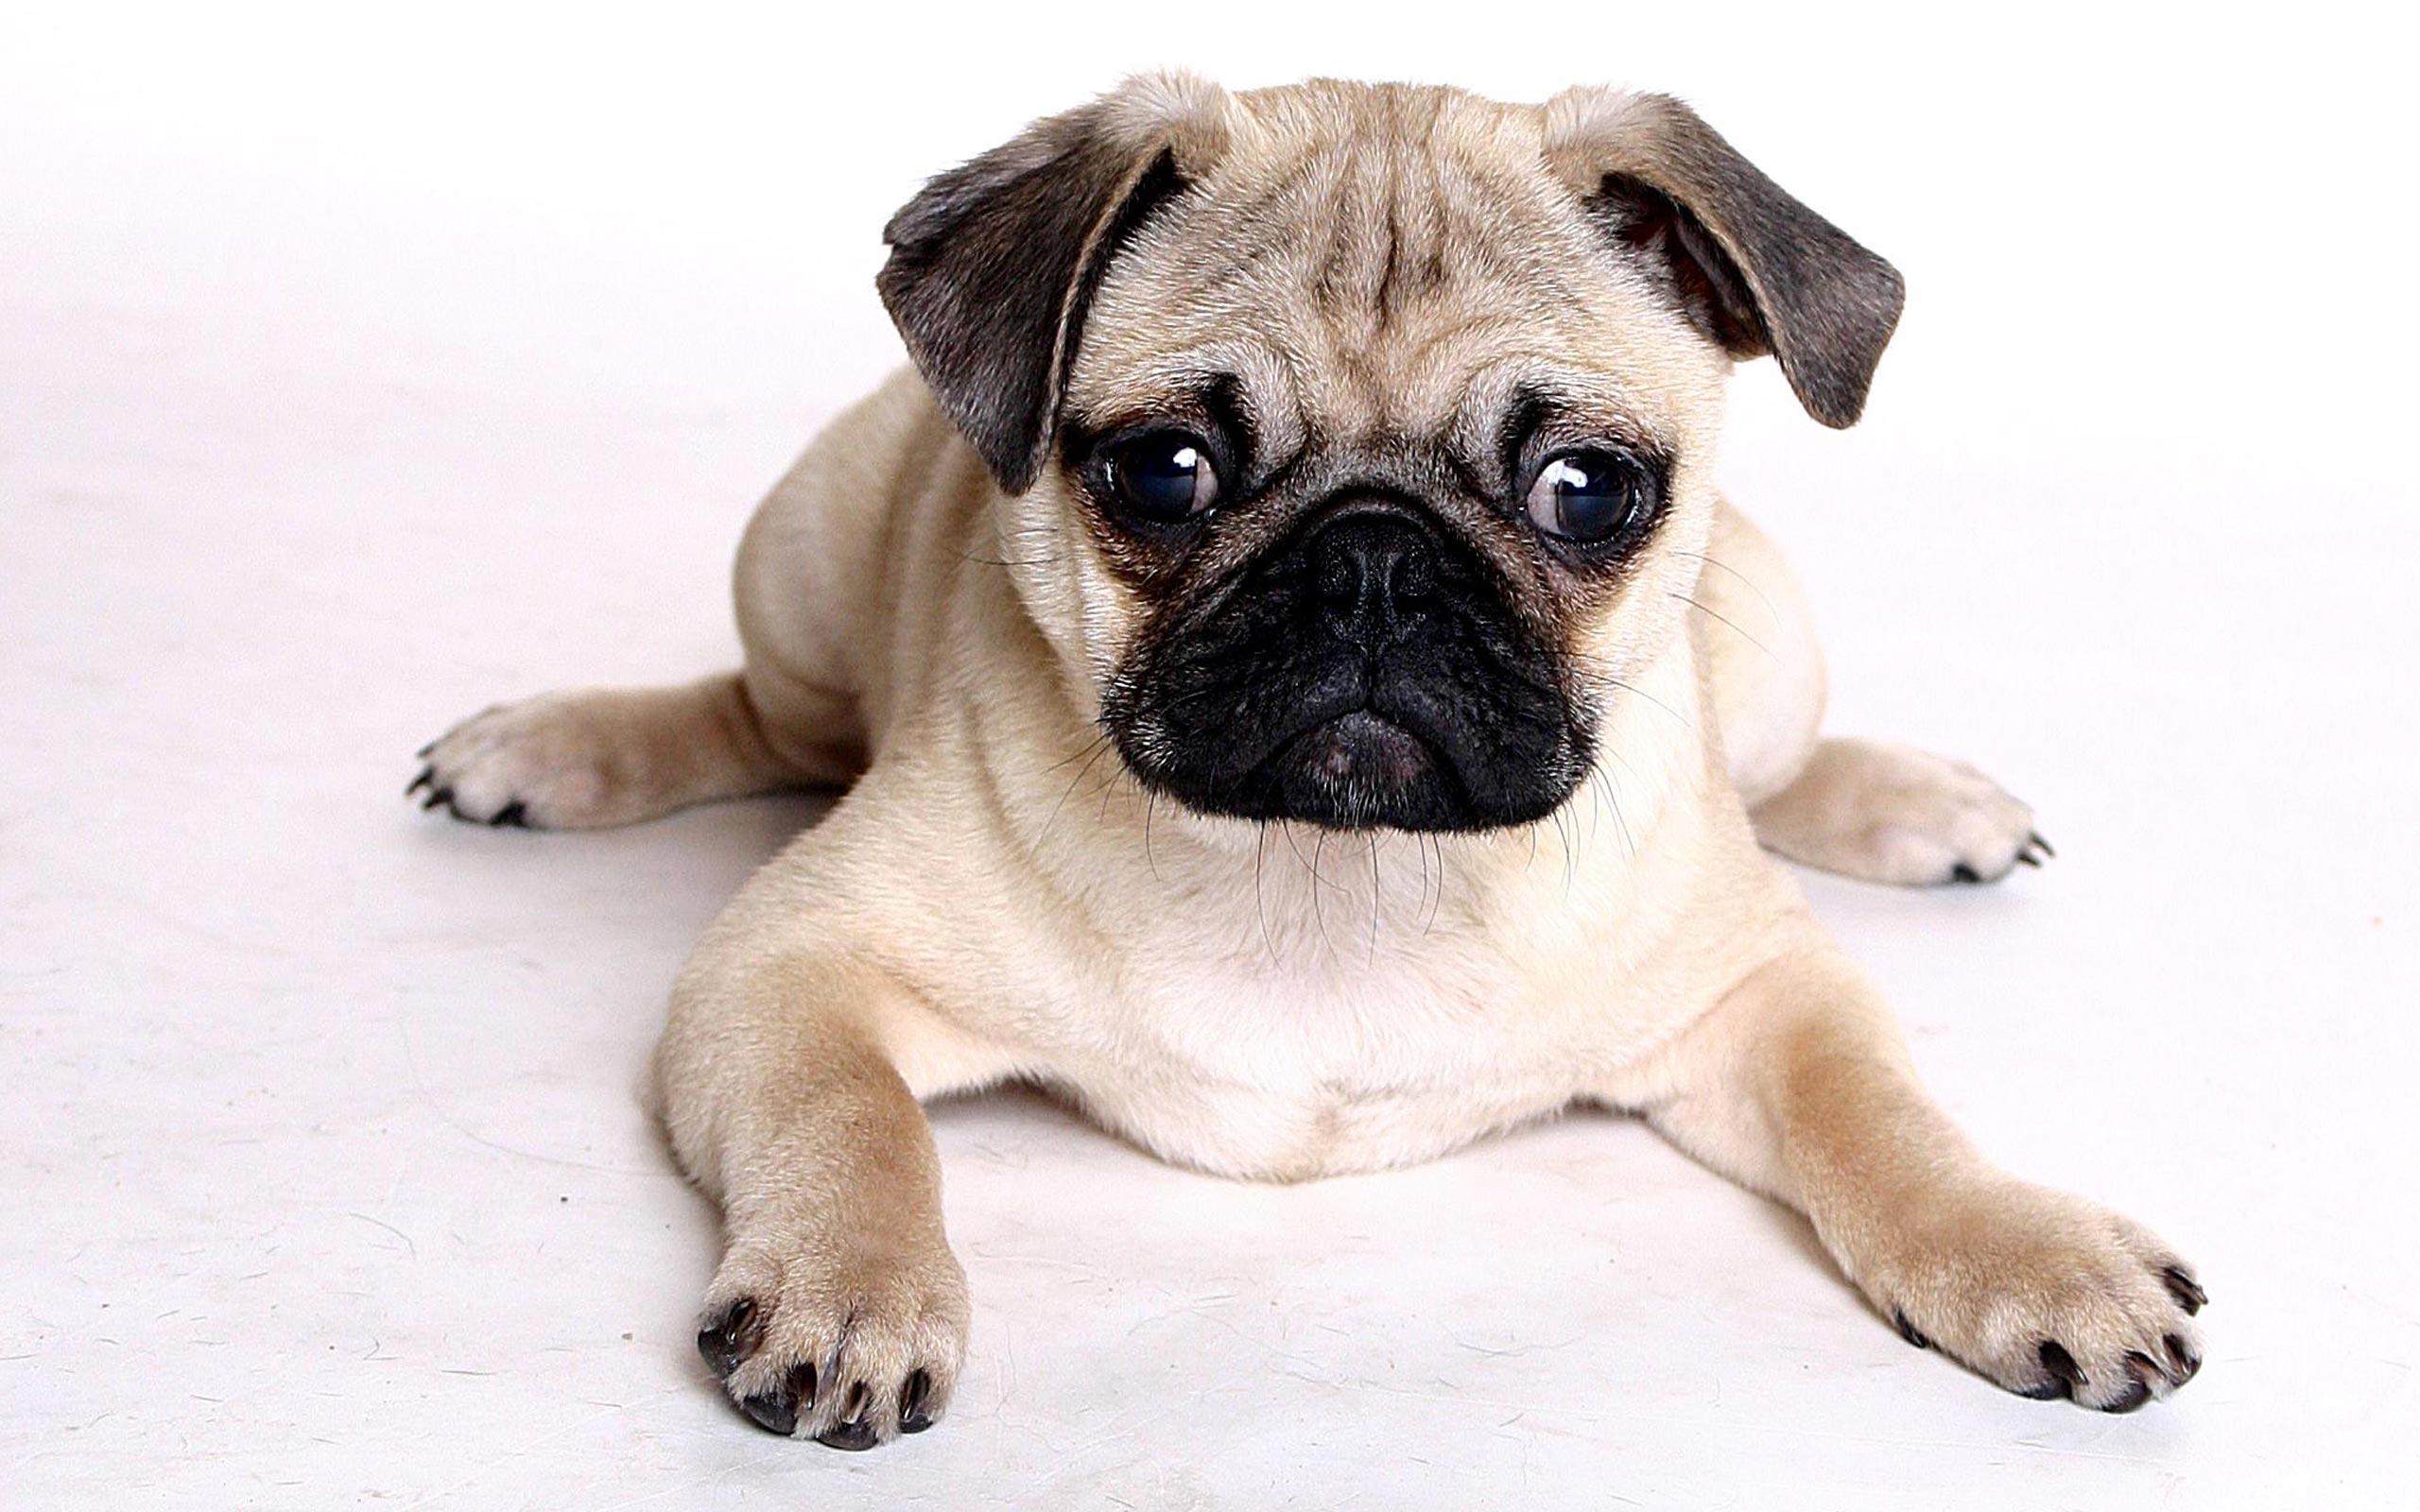 Cute pug puppies image download